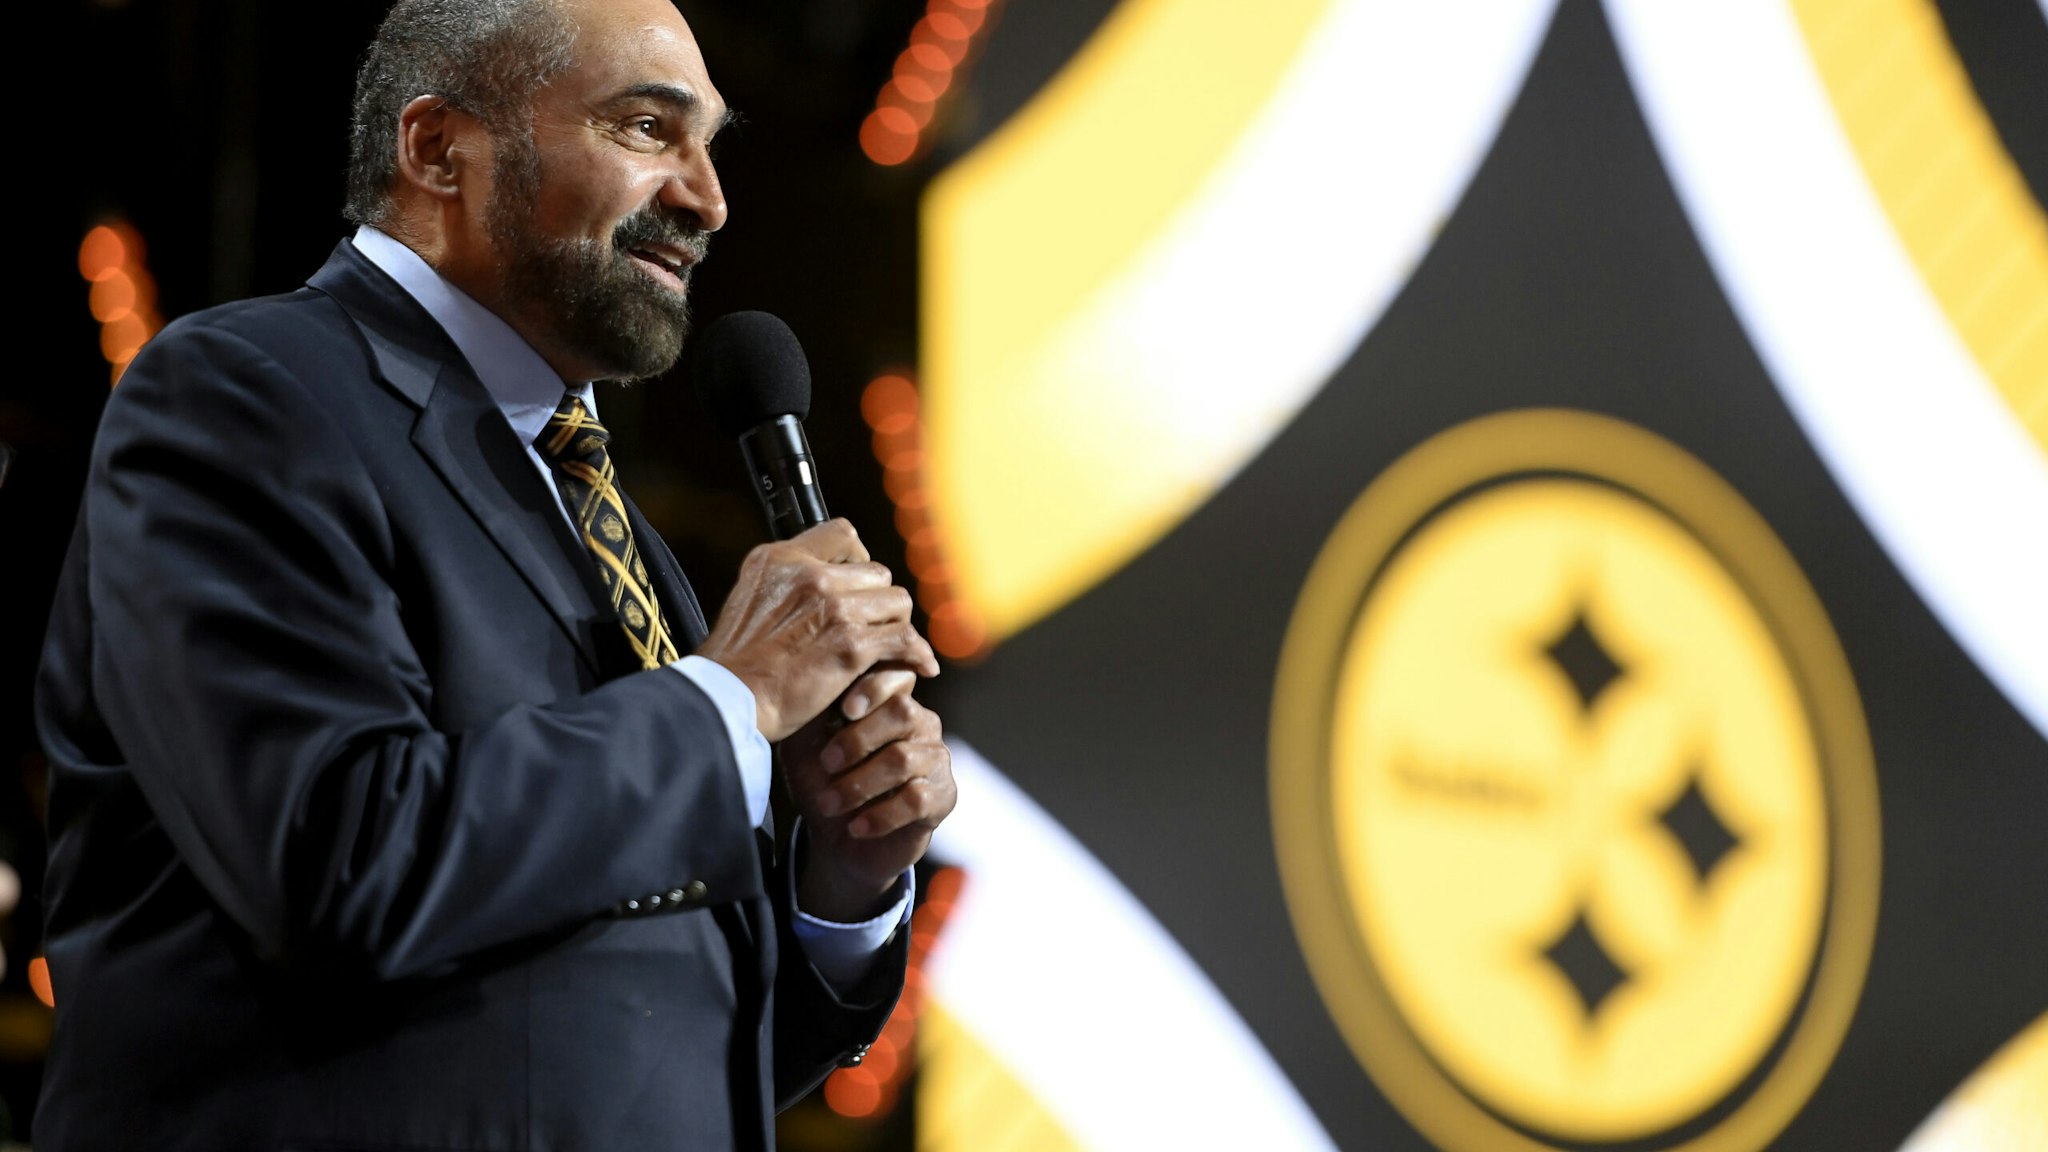 Franco Harris, the NFL Hall of Fame running back who helped the Pittsburgh Steelers win four Super Bowls in the 1970s and caught the so-called “Immaculate Reception,” has died at 72.